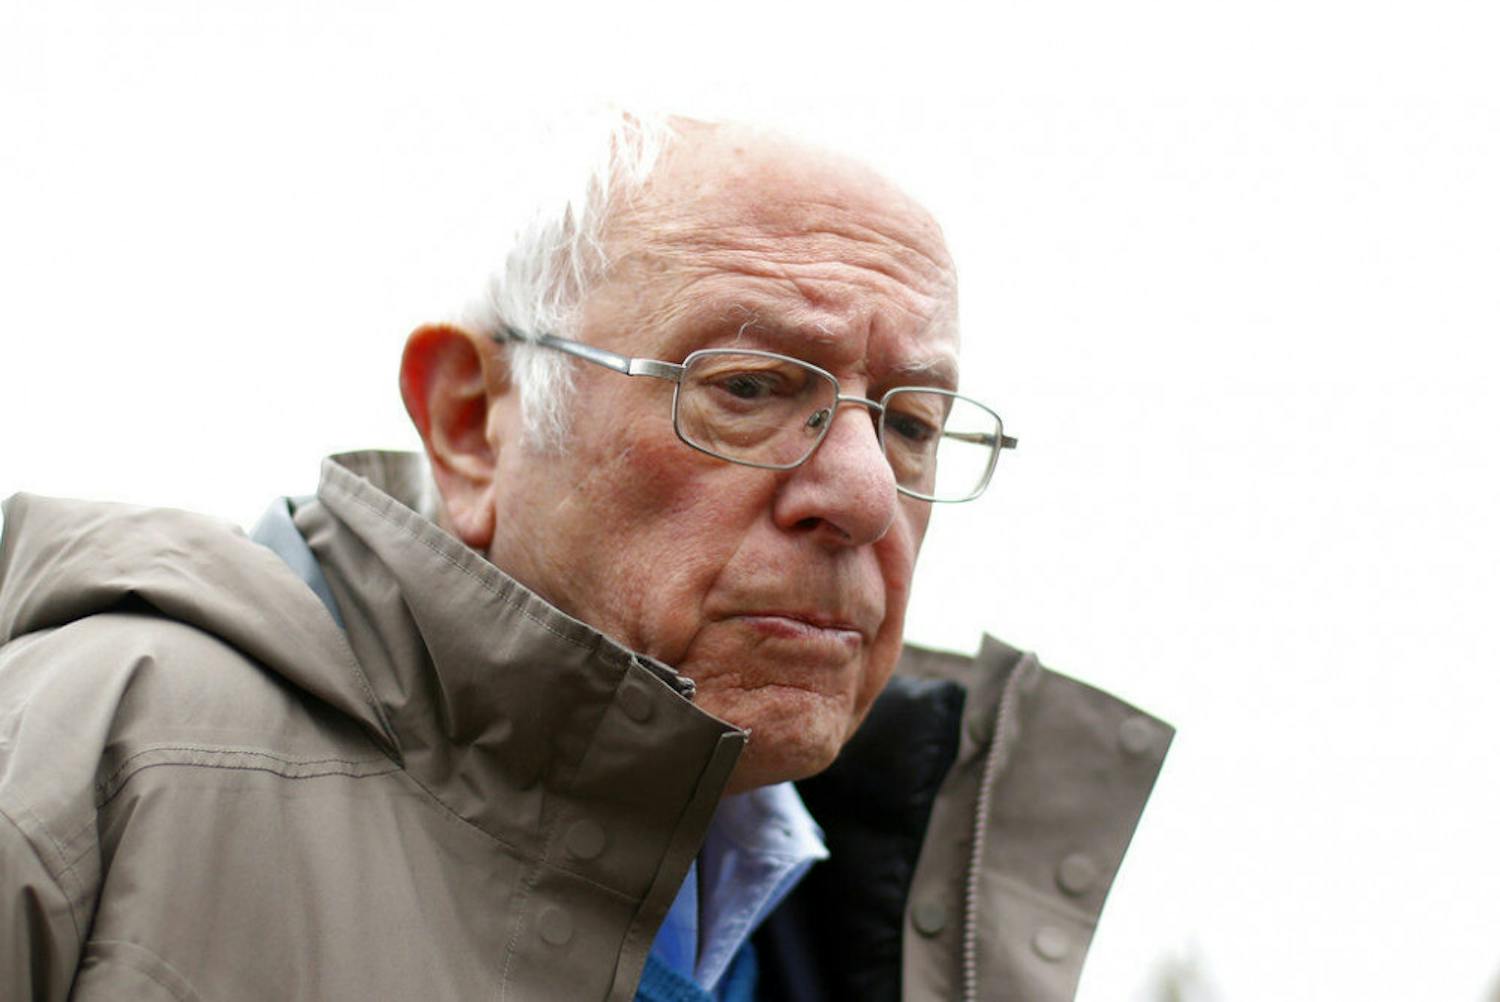 FILE - In this March 10, 2020, file photo Democratic presidential candidate Sen. Bernie Sanders, I-Vt., visits outside a polling location at Warren E. Bow Elementary School in Detroit. (AP Photo/Paul Sancya, File)